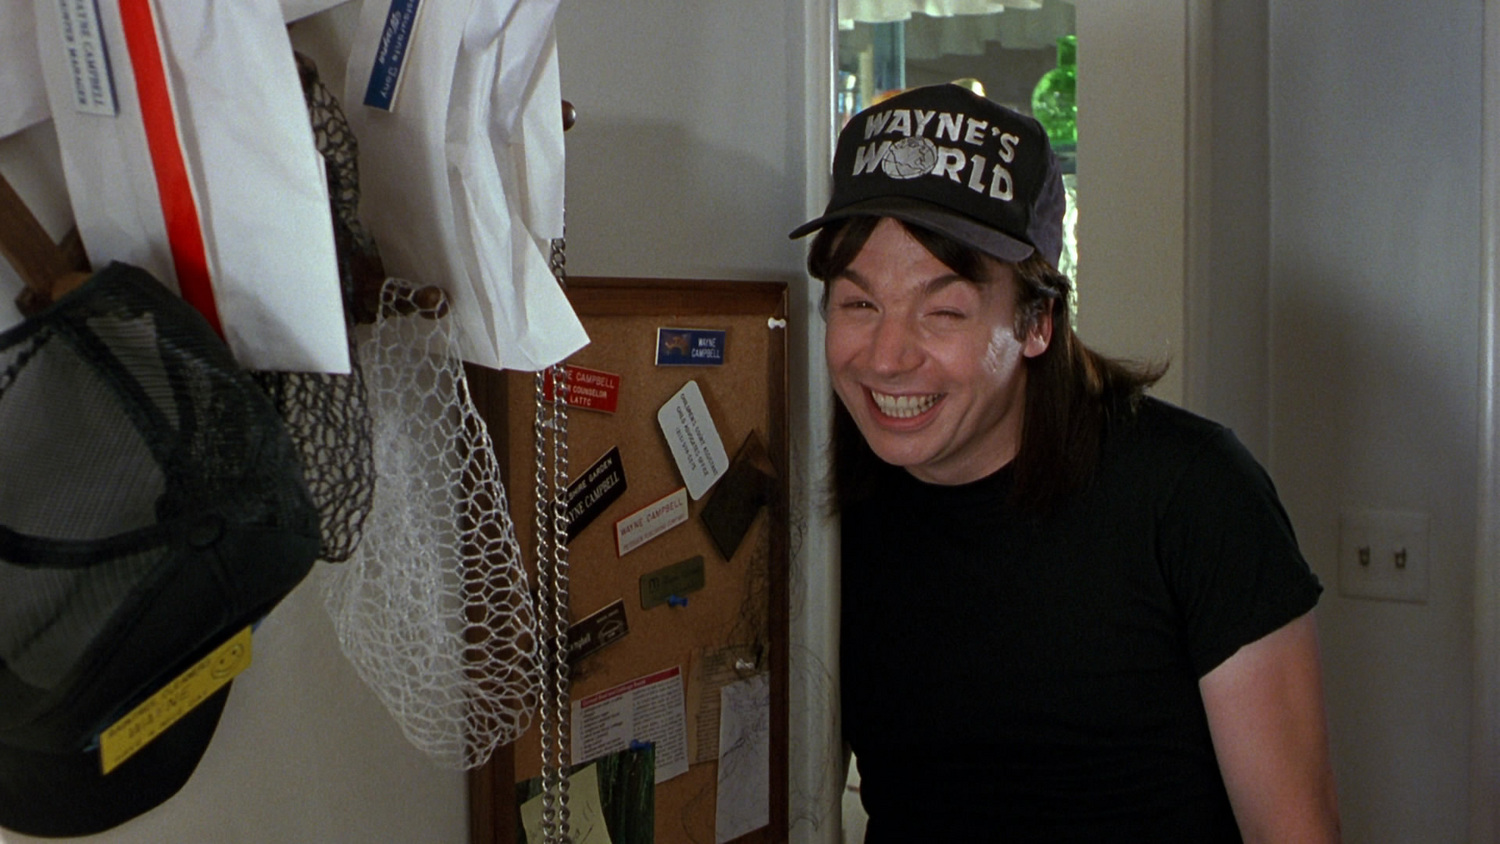 A screen grab of Wayne from the movie Waynes World, smiling awkwardly, next to his extensive collection of name tags and hair nets.